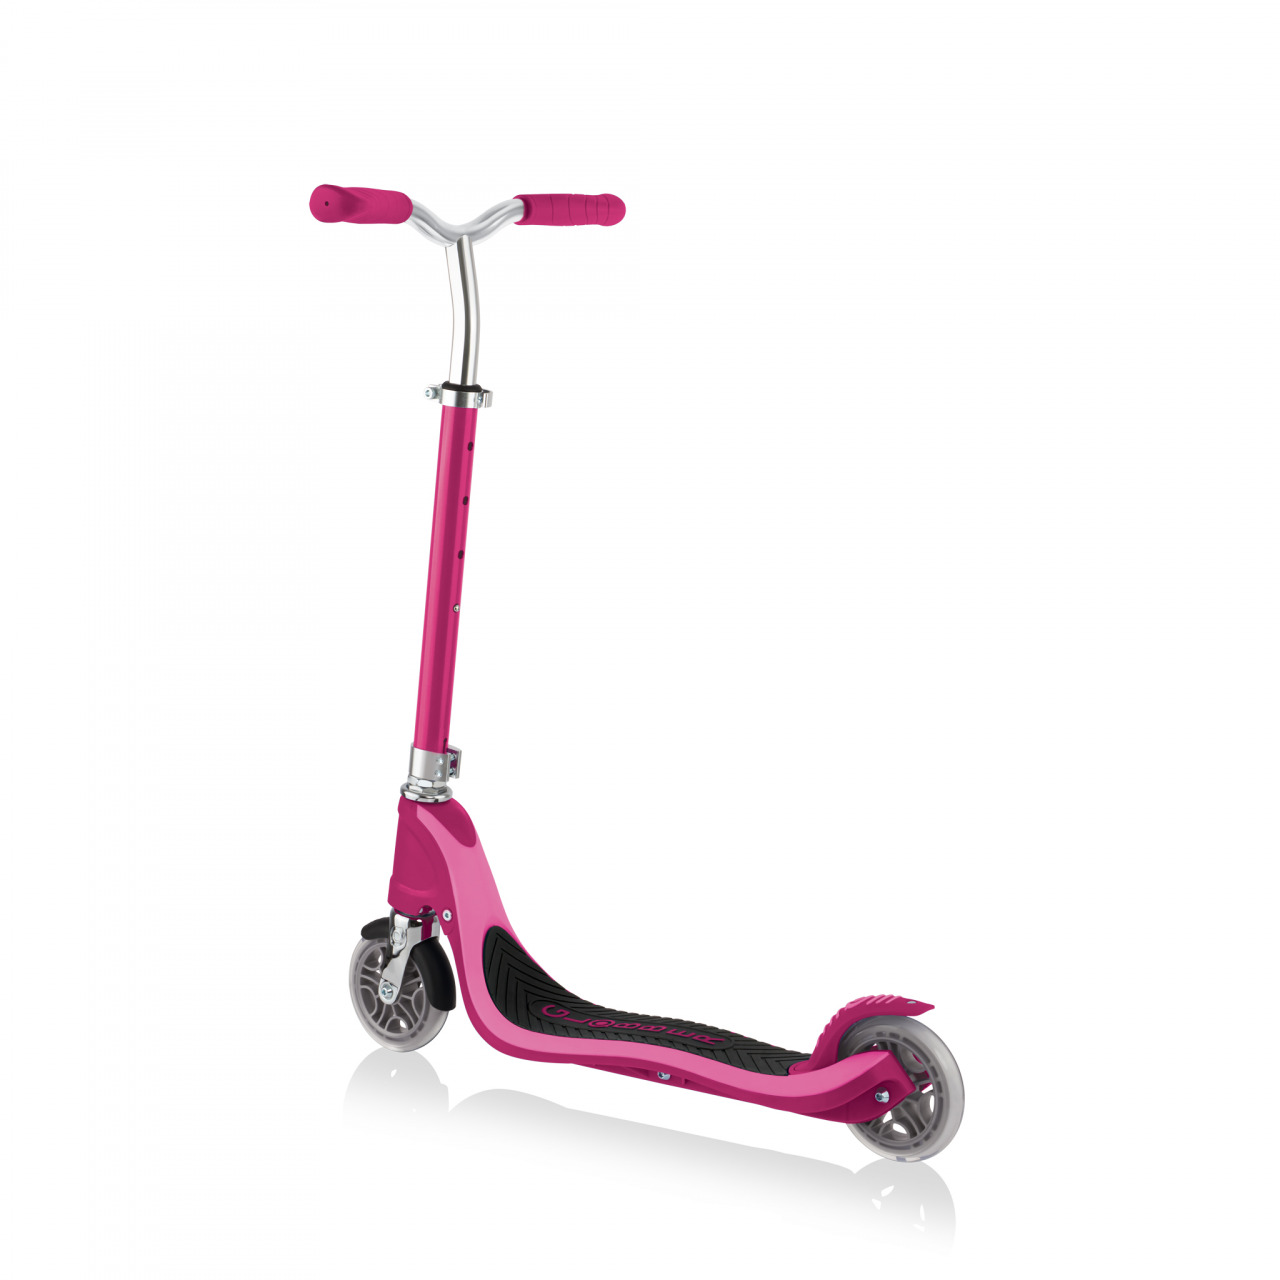 770 114 Kick Scooter For Teenager